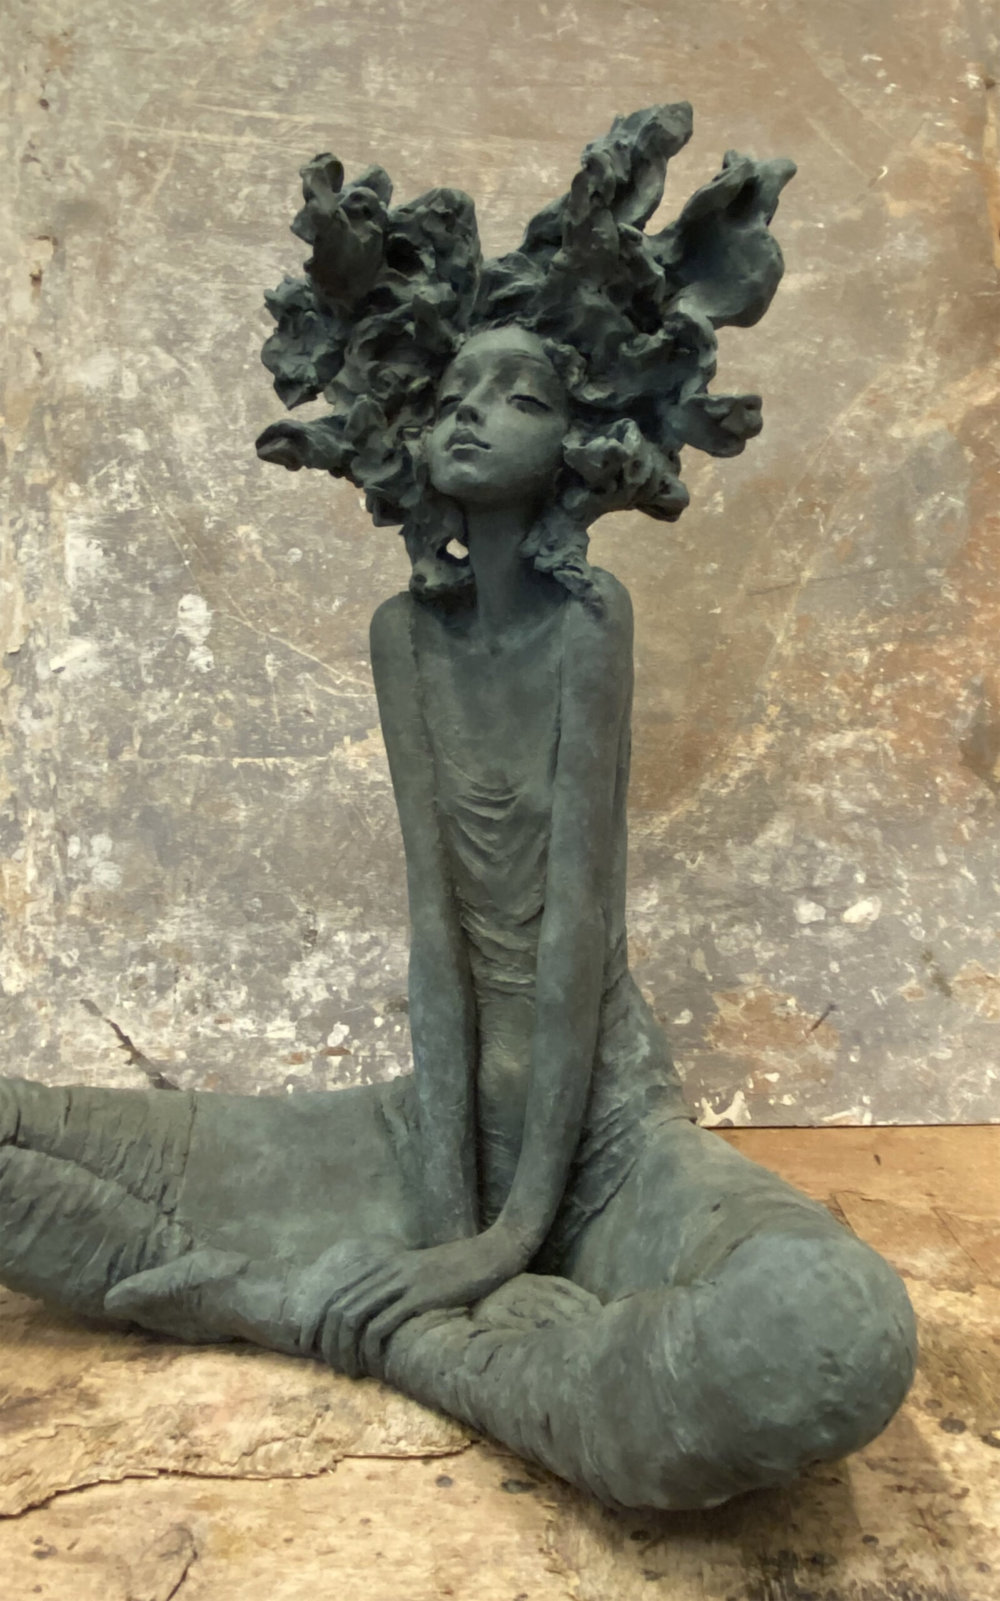 Petites Bonnes Femmes Poetic Bronze Sculptures Of Melancholic Women With Coiffed Hair By Valerie Hadida 12